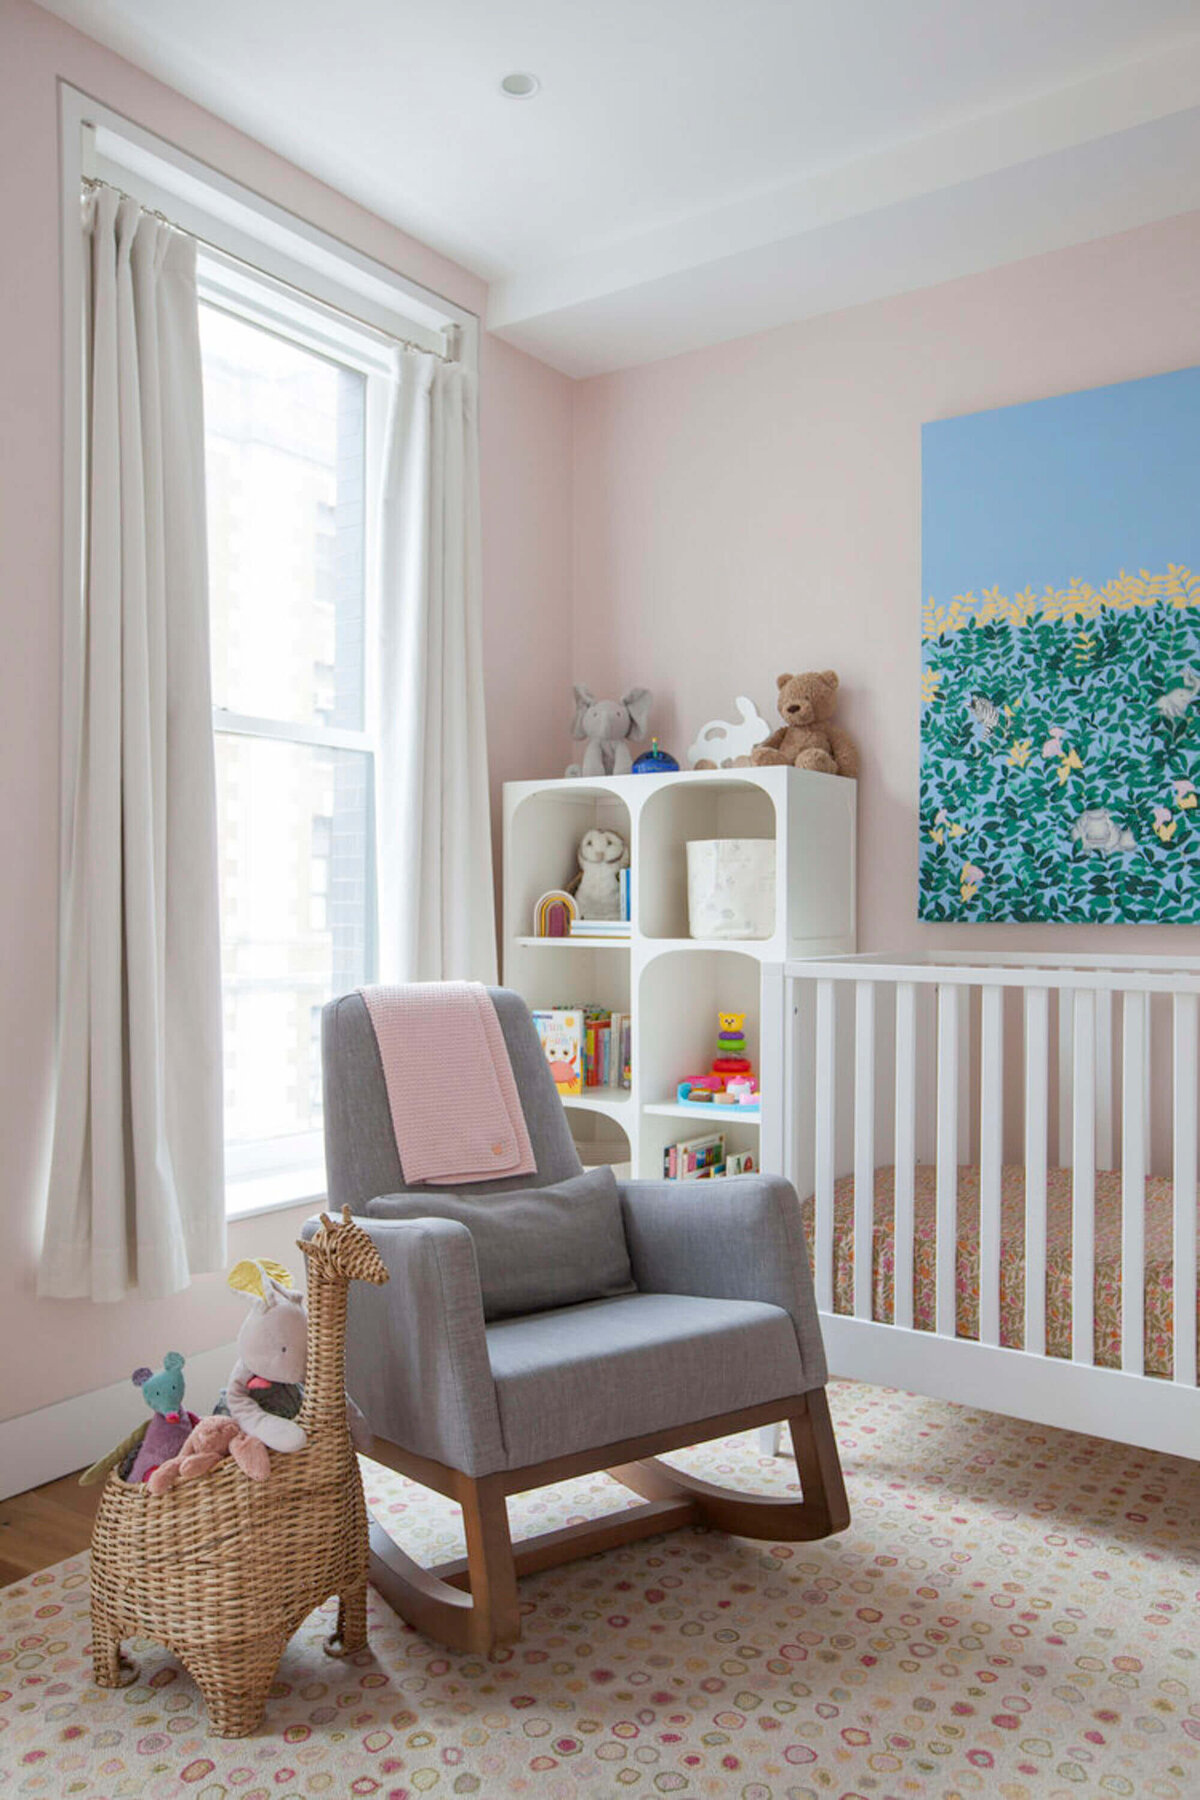 Stylish nursery with grey rocking chair and toy accents.